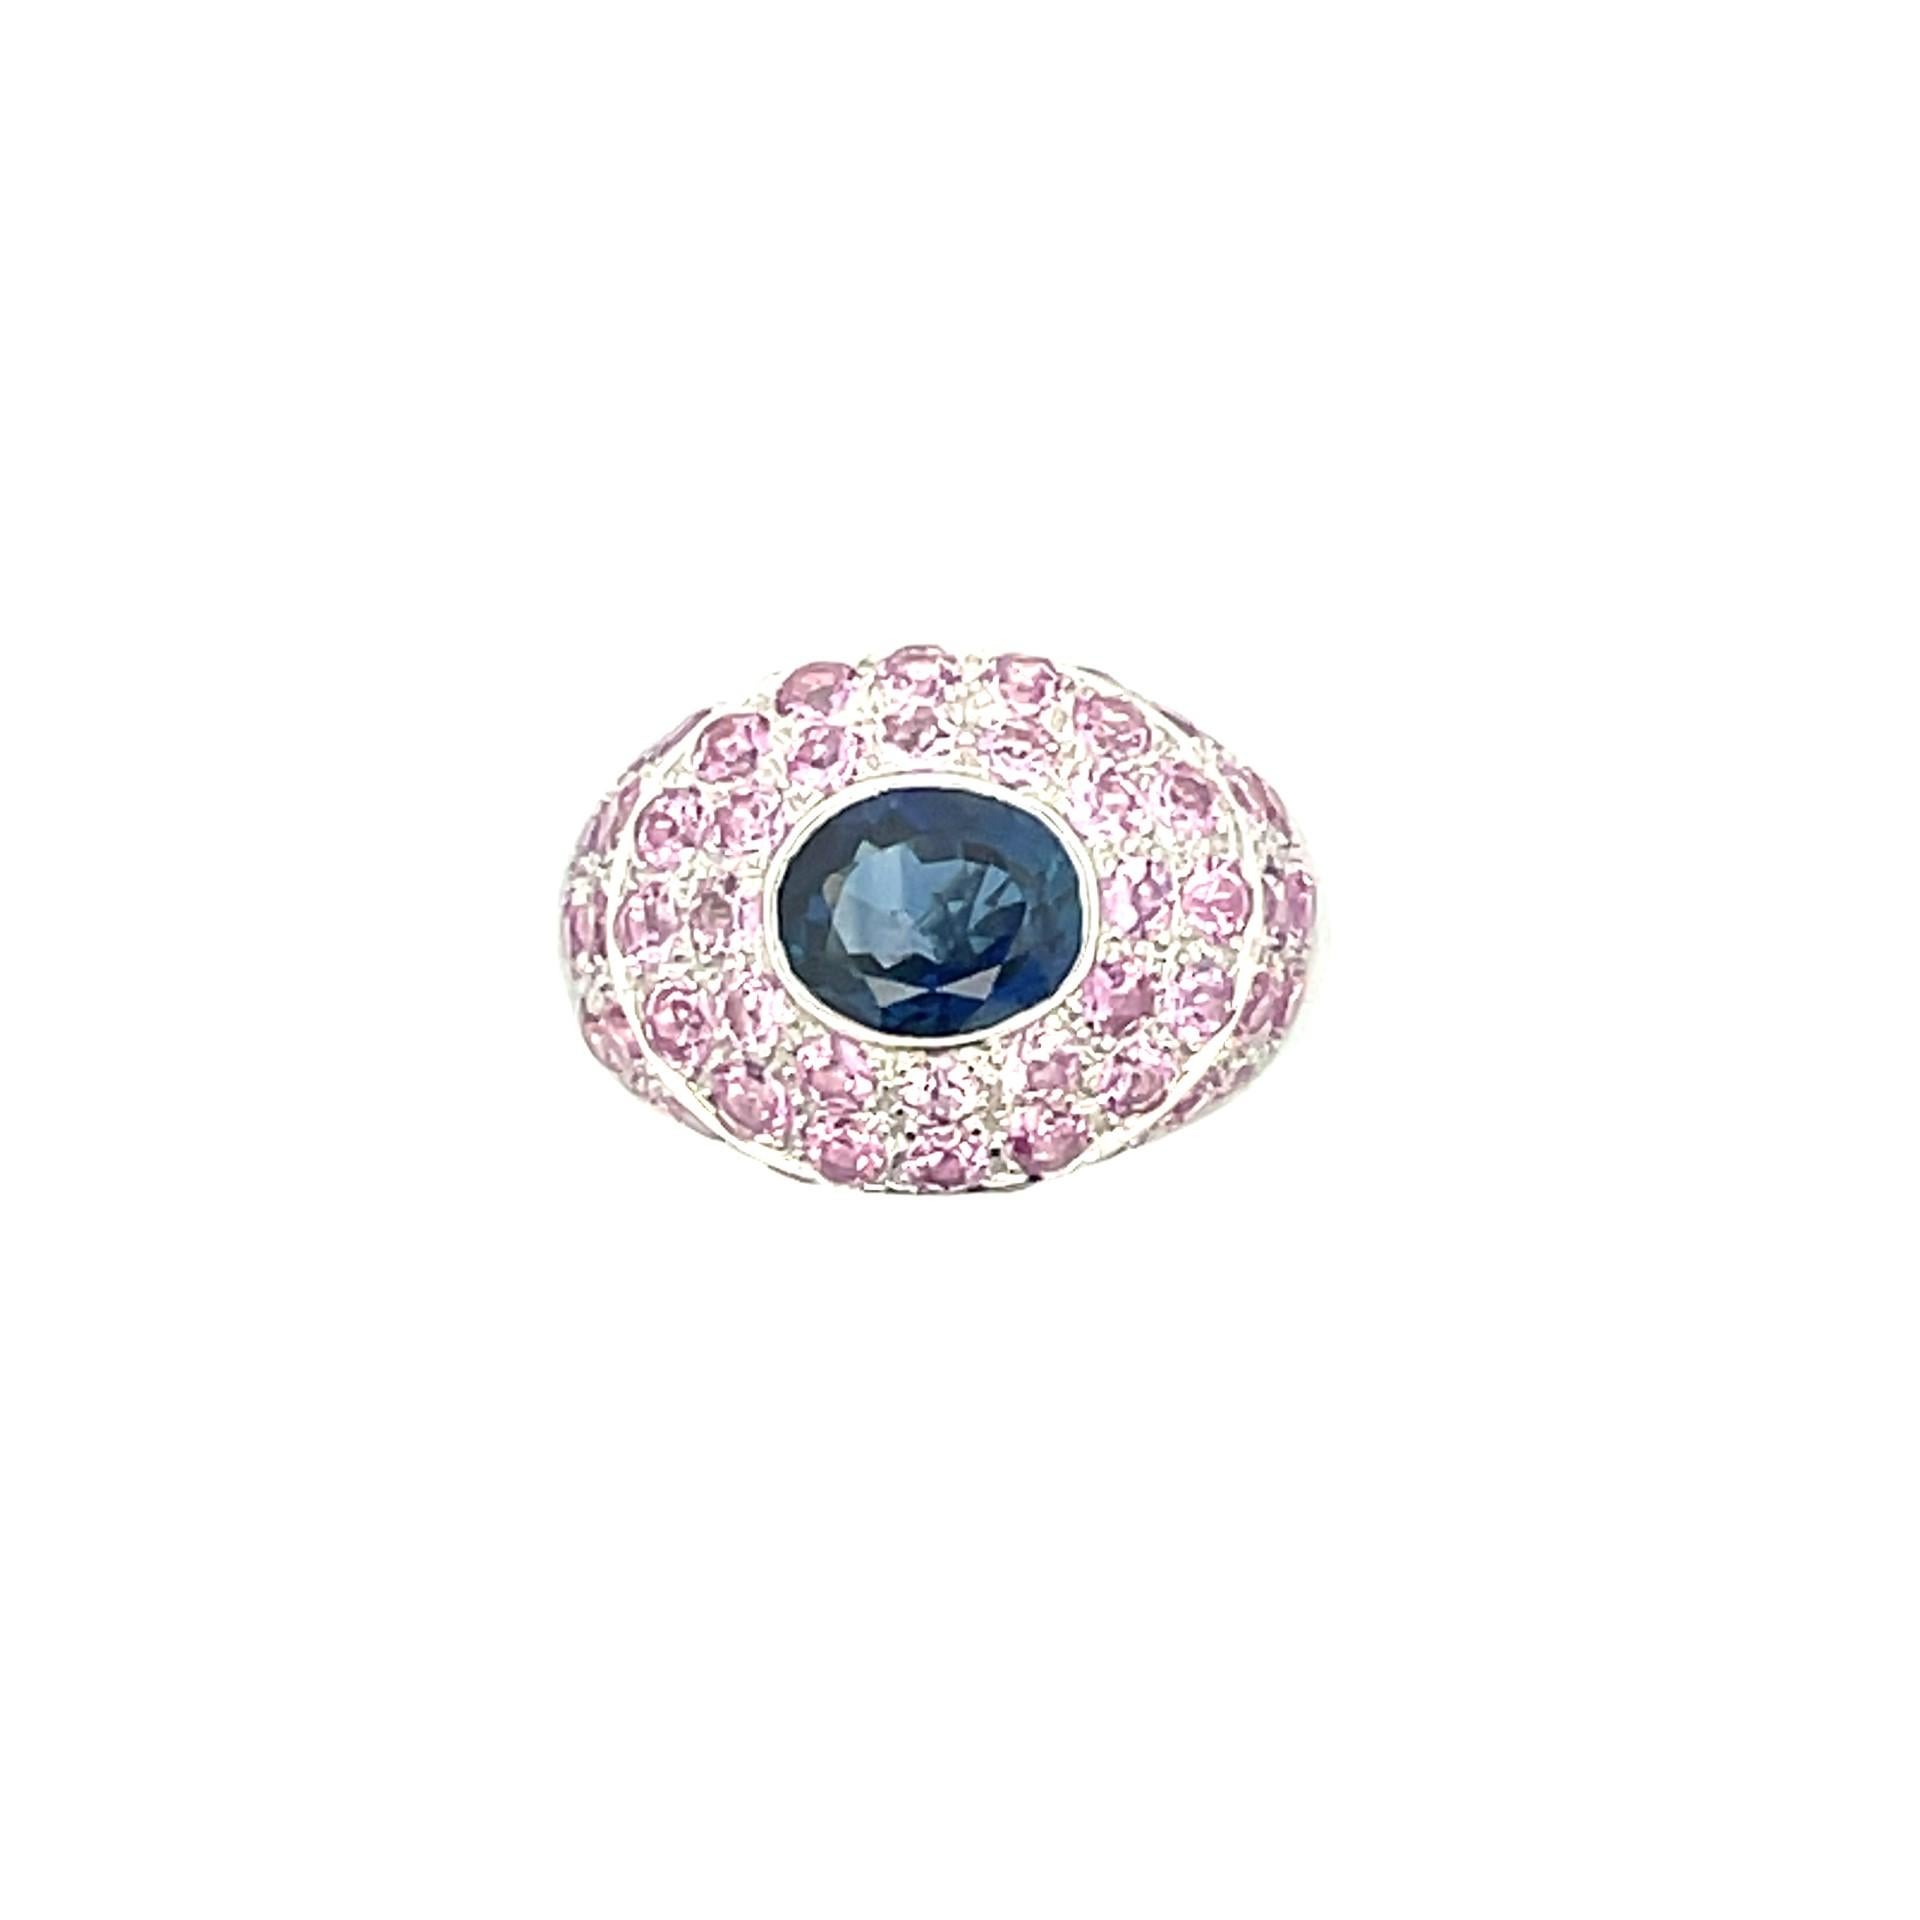 This gorgeous natural blue sapphire and natural pink sapphire pave ring in 18 kt white gold is the paramount of true elegance.

1 natural blue sapphire 2.22ct total weight

59 natural pink sapphires 3.62ct total weight

18kt white gold weighing 12